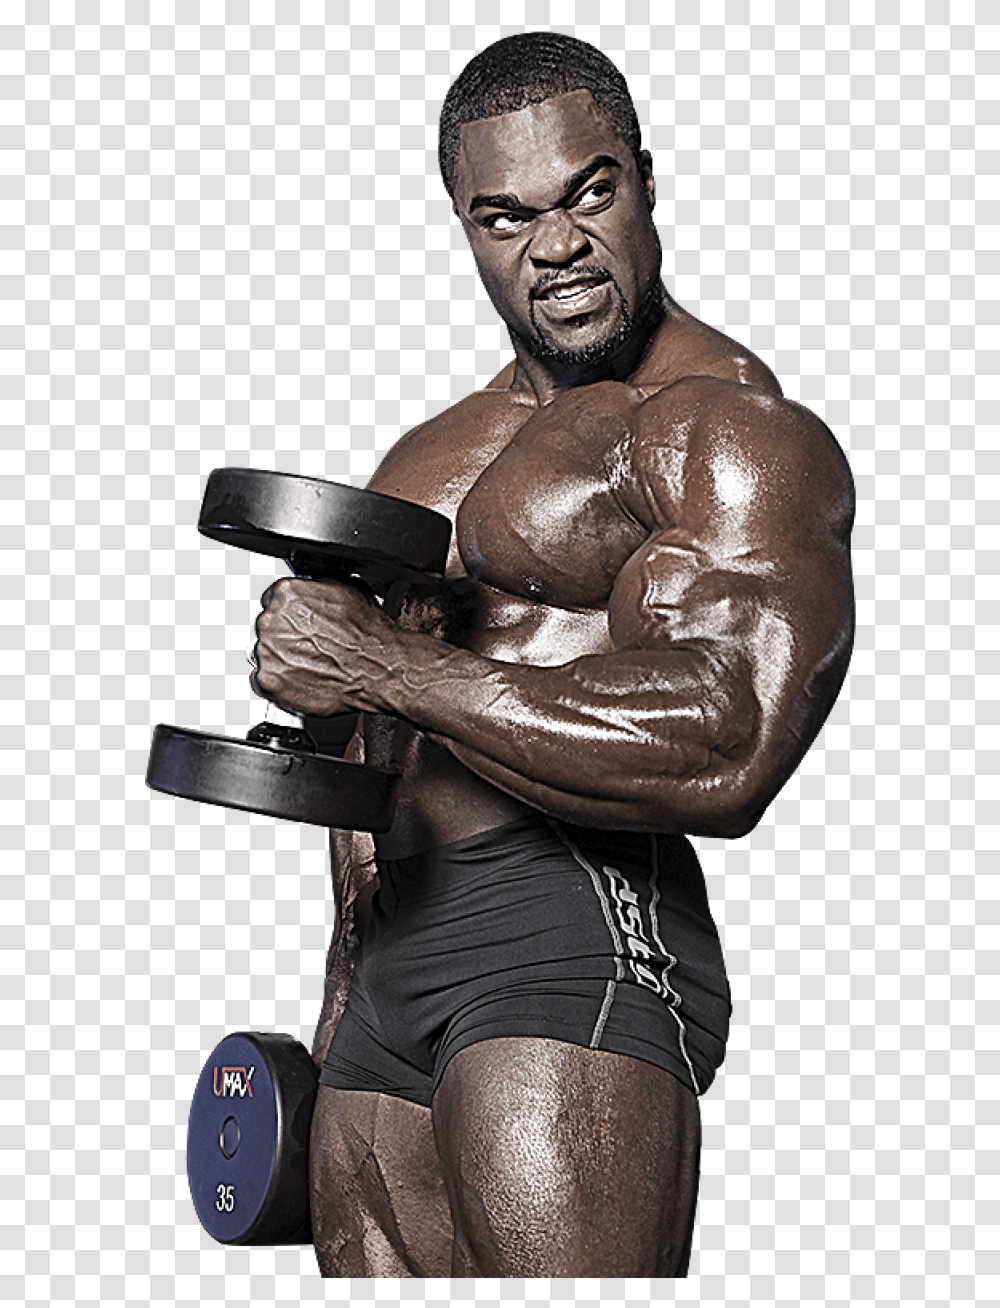 Muscle Man Image Muscle Men, Person, Human, Sport, Sports Transparent Png